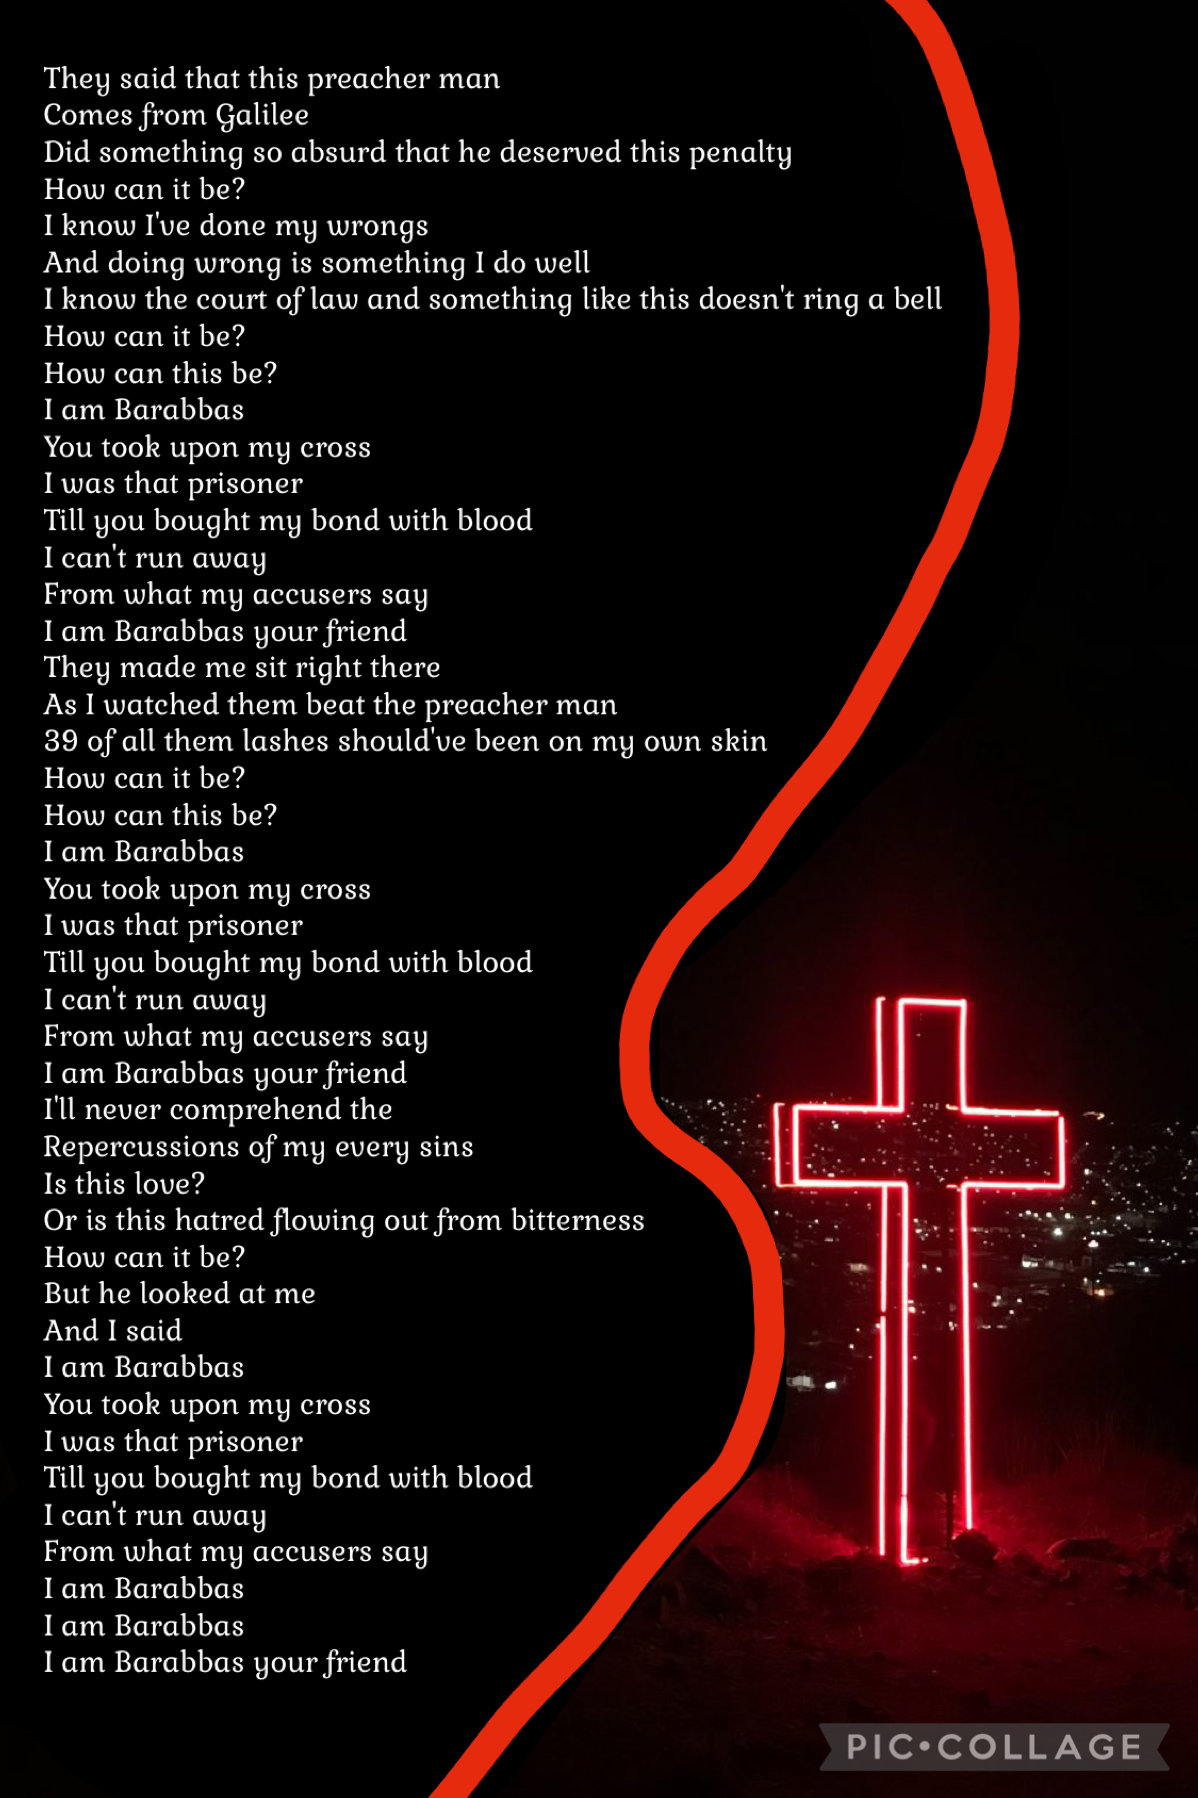 Go listen to ‘I Am Barabbas’ by Josiah Queen. 

I haven’t been doing well so I haven’t been posting, the devil has his ways of attacking us and we don’t realize it. Gods with us and for us ✝️✝️❤️